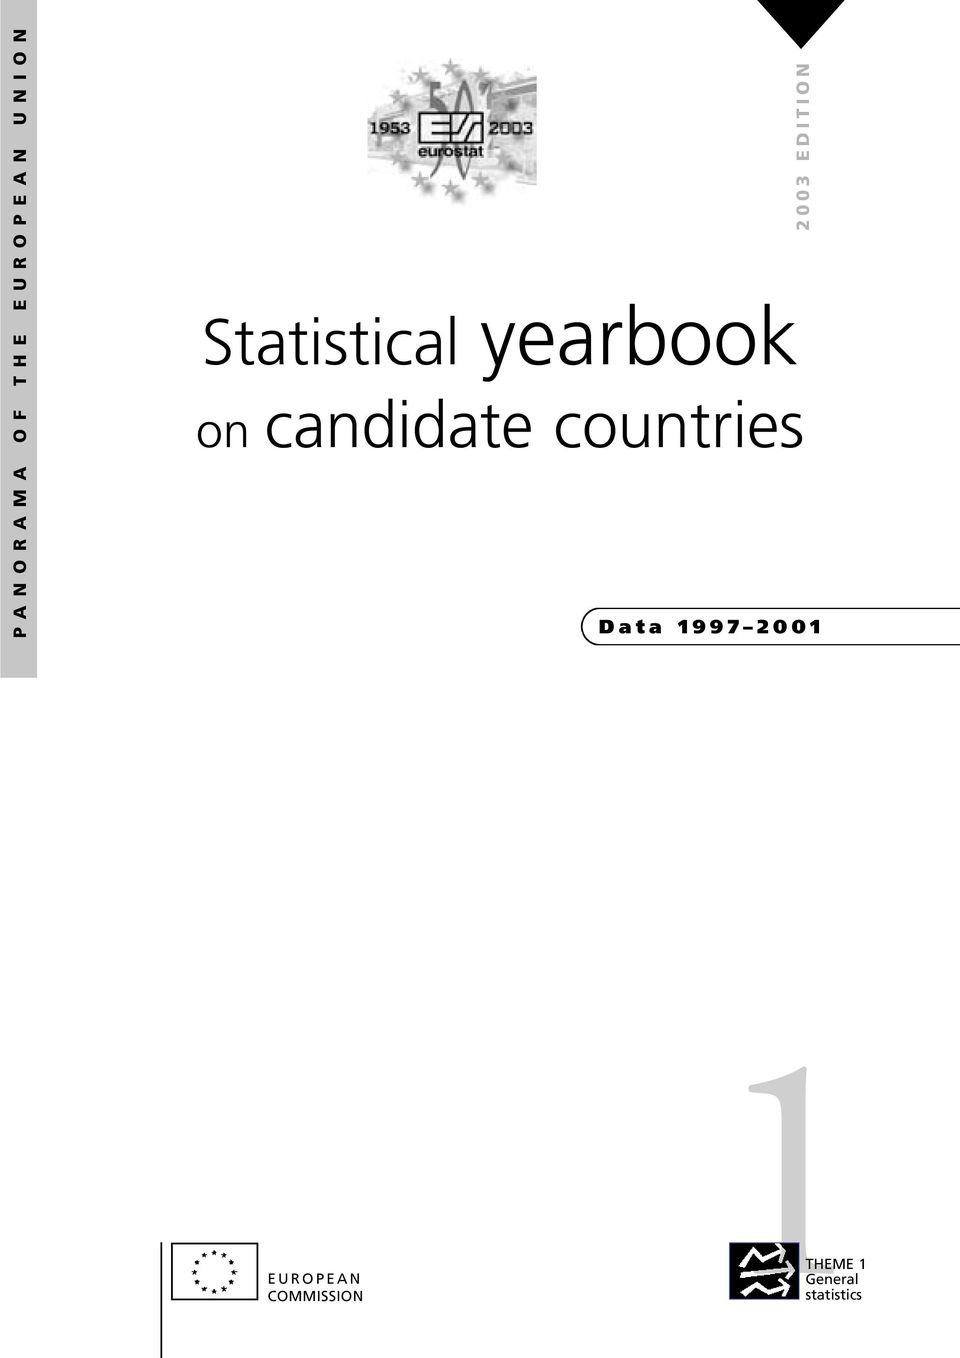 countries 2003 EDITION Data 1997 2001